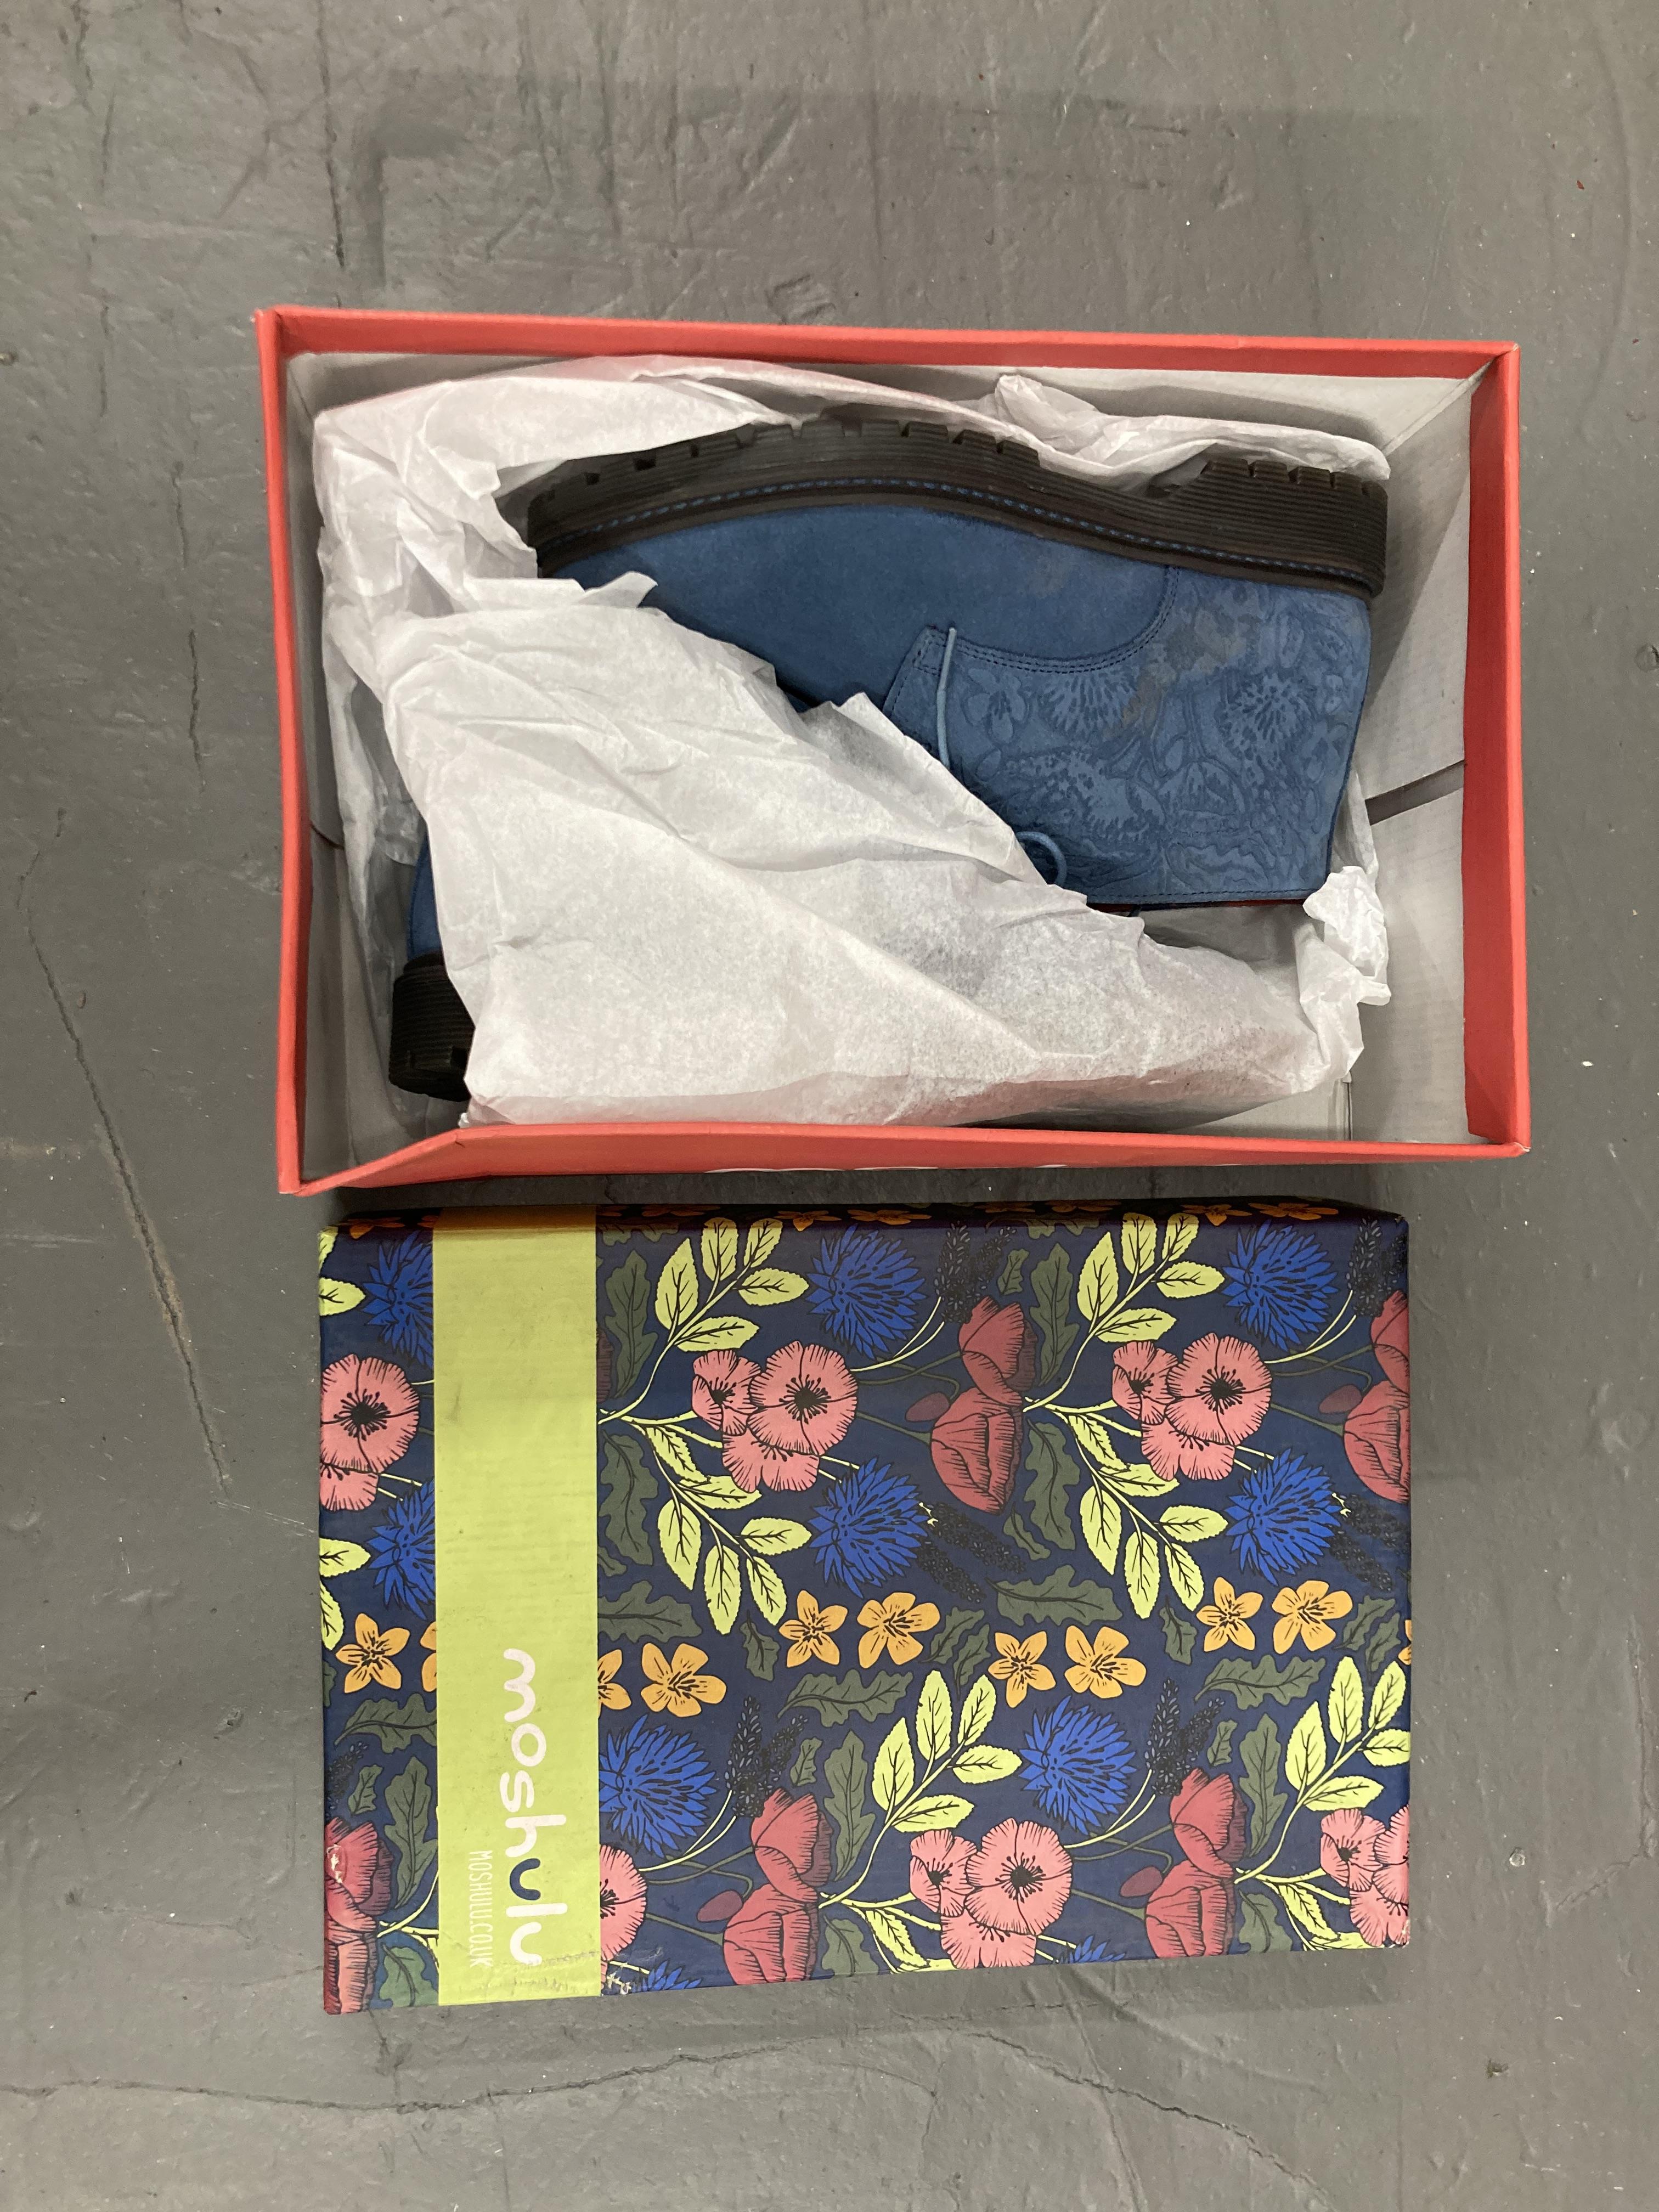 A pair of Moshulu Fala suede aegean blue gents shoes, size 5, boxed.